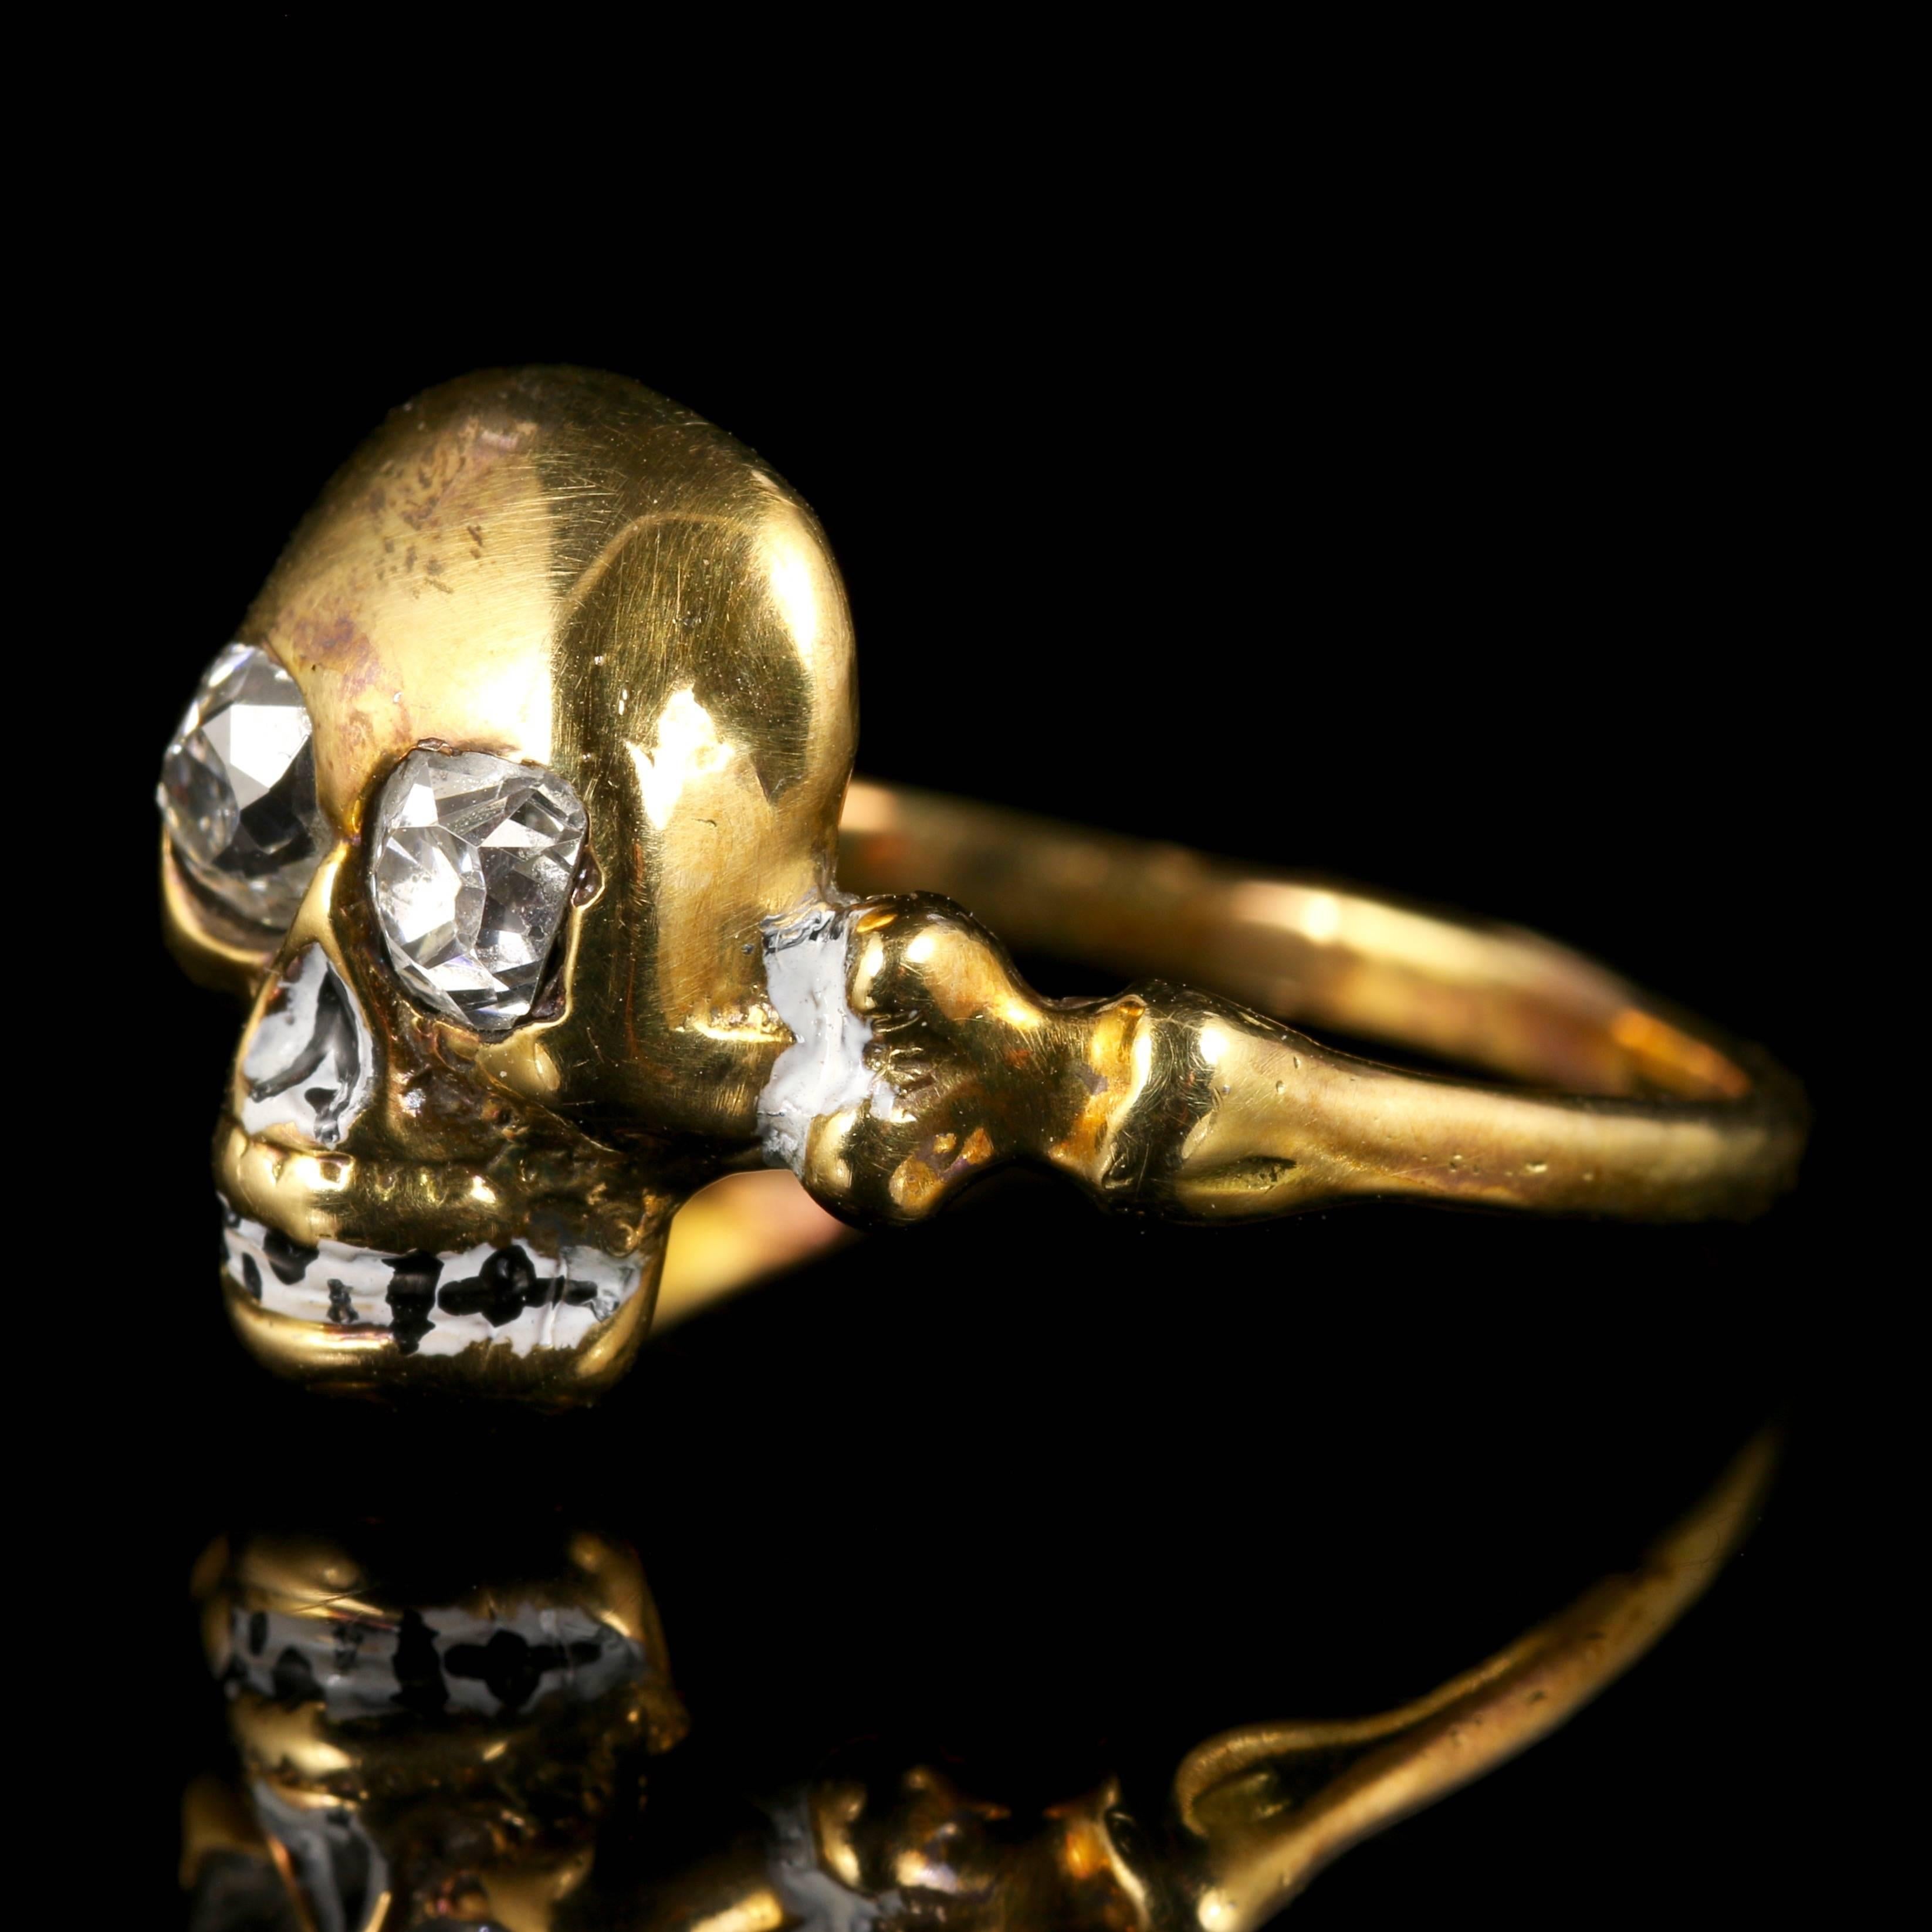 This fabulous 18ct Yellow Gold Memento Mori Diamond Skull ring is fabulous.

The skull is set with Diamond eyes, approx. 0.22ct each Diamond 0.44ct in total.

Skull jewellery (Memento Mori) is very collectable. 

Memento Mori means, Remember that